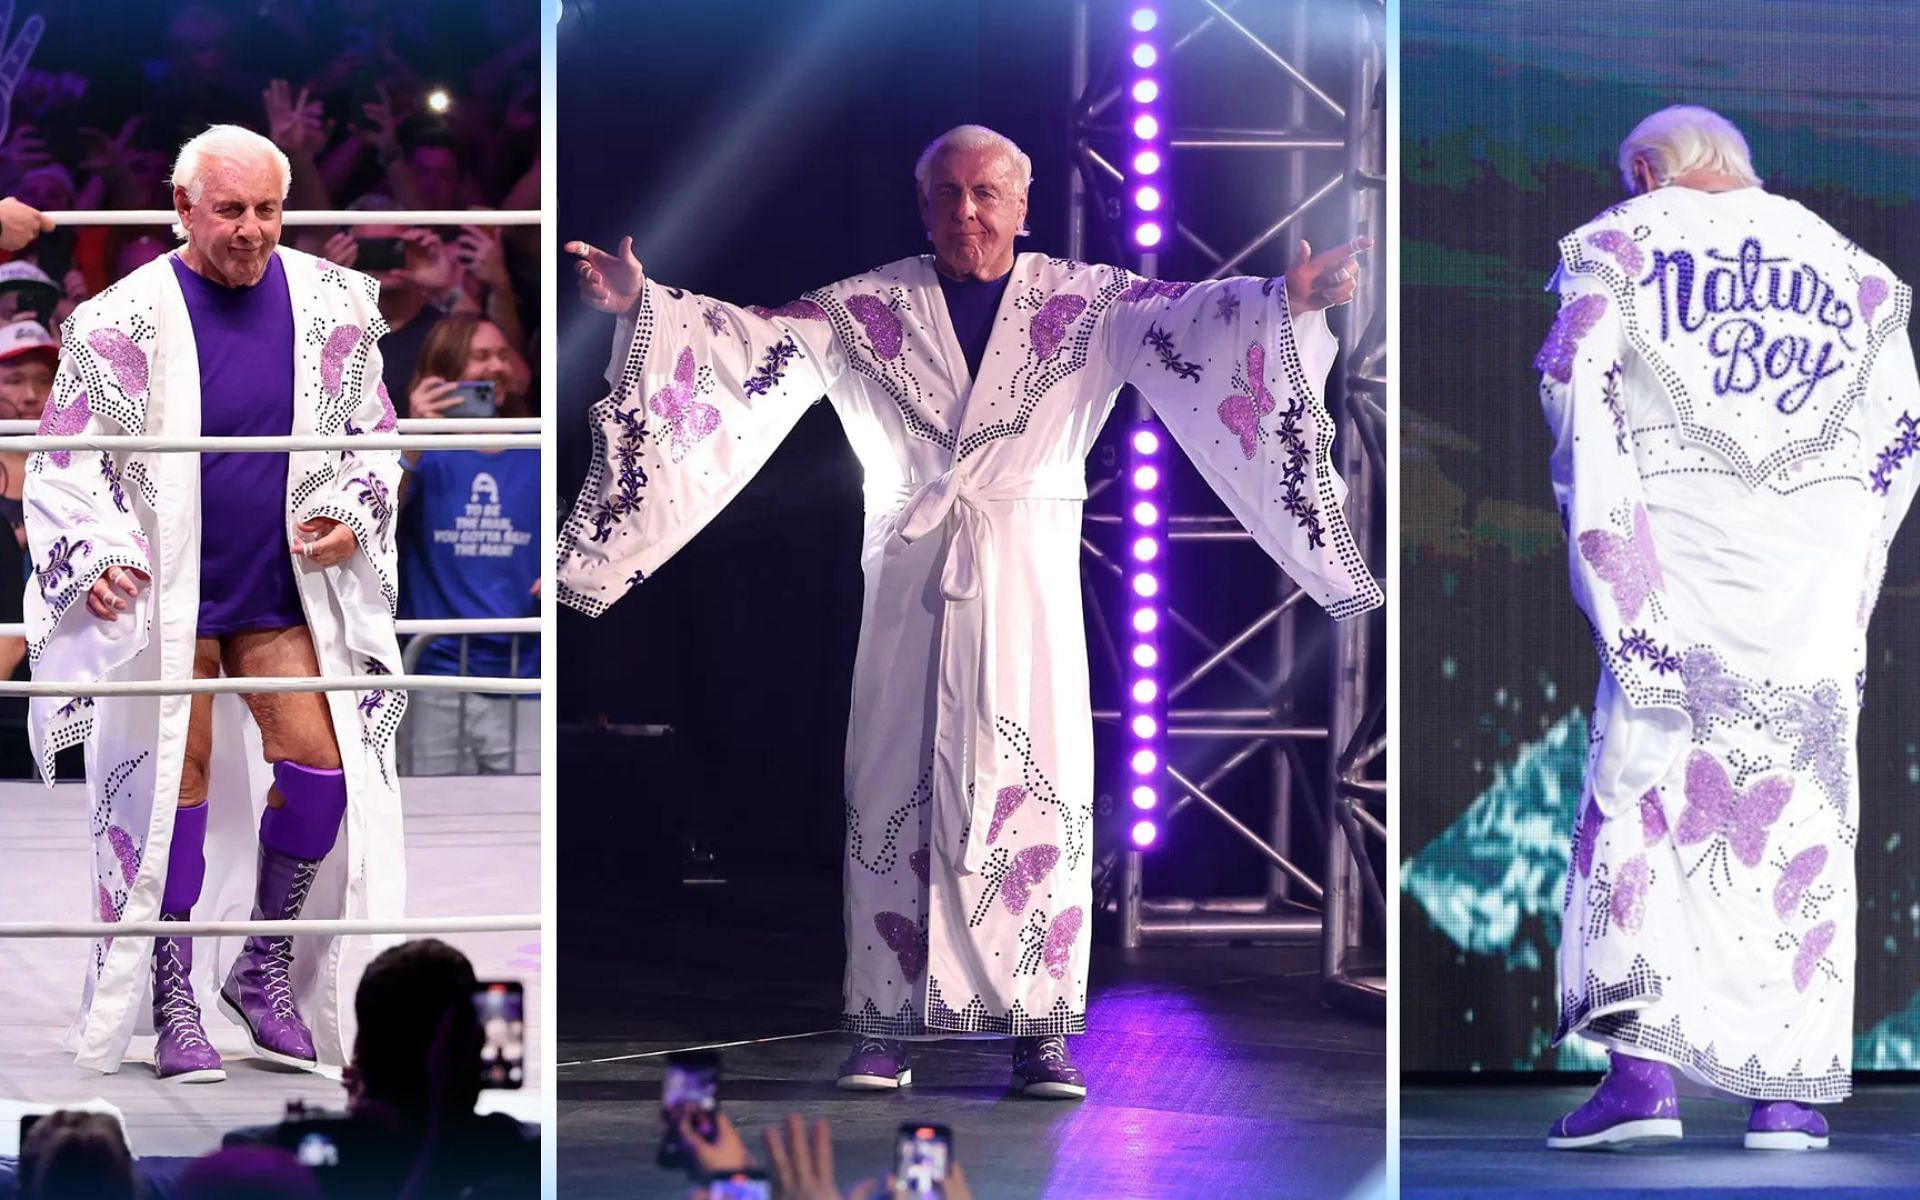 WWE Hall of Famer Ric Flair during his last match